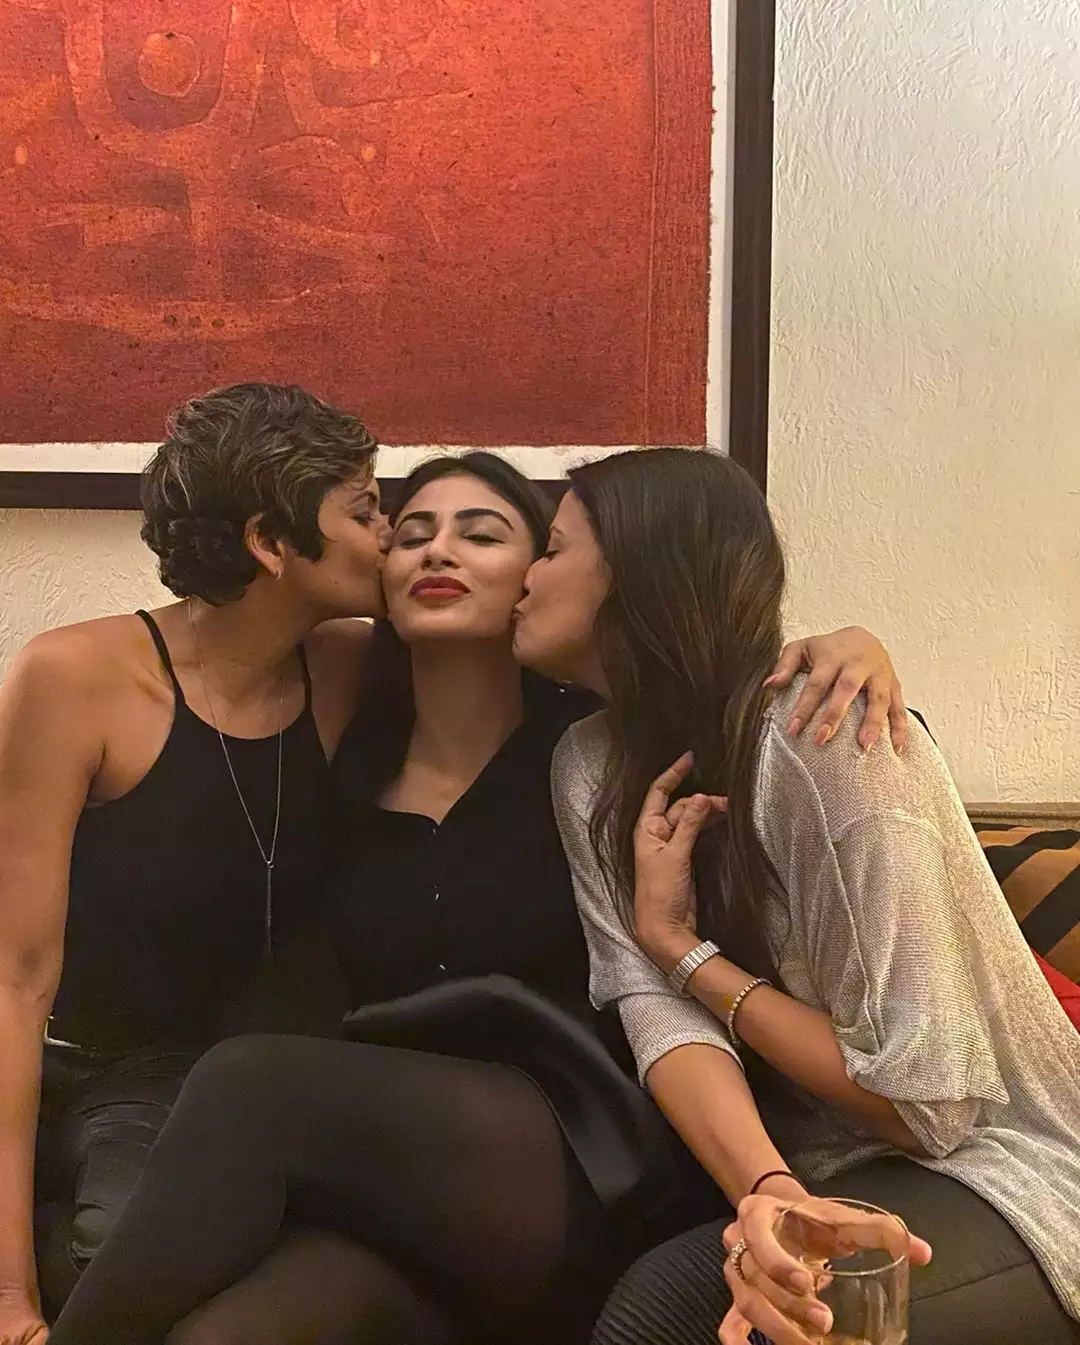 Tridha Choudhury, Mouni Roy, And Mandira Bedi Are All About Friendship: Know More About Their Recent Friendship Moment 1